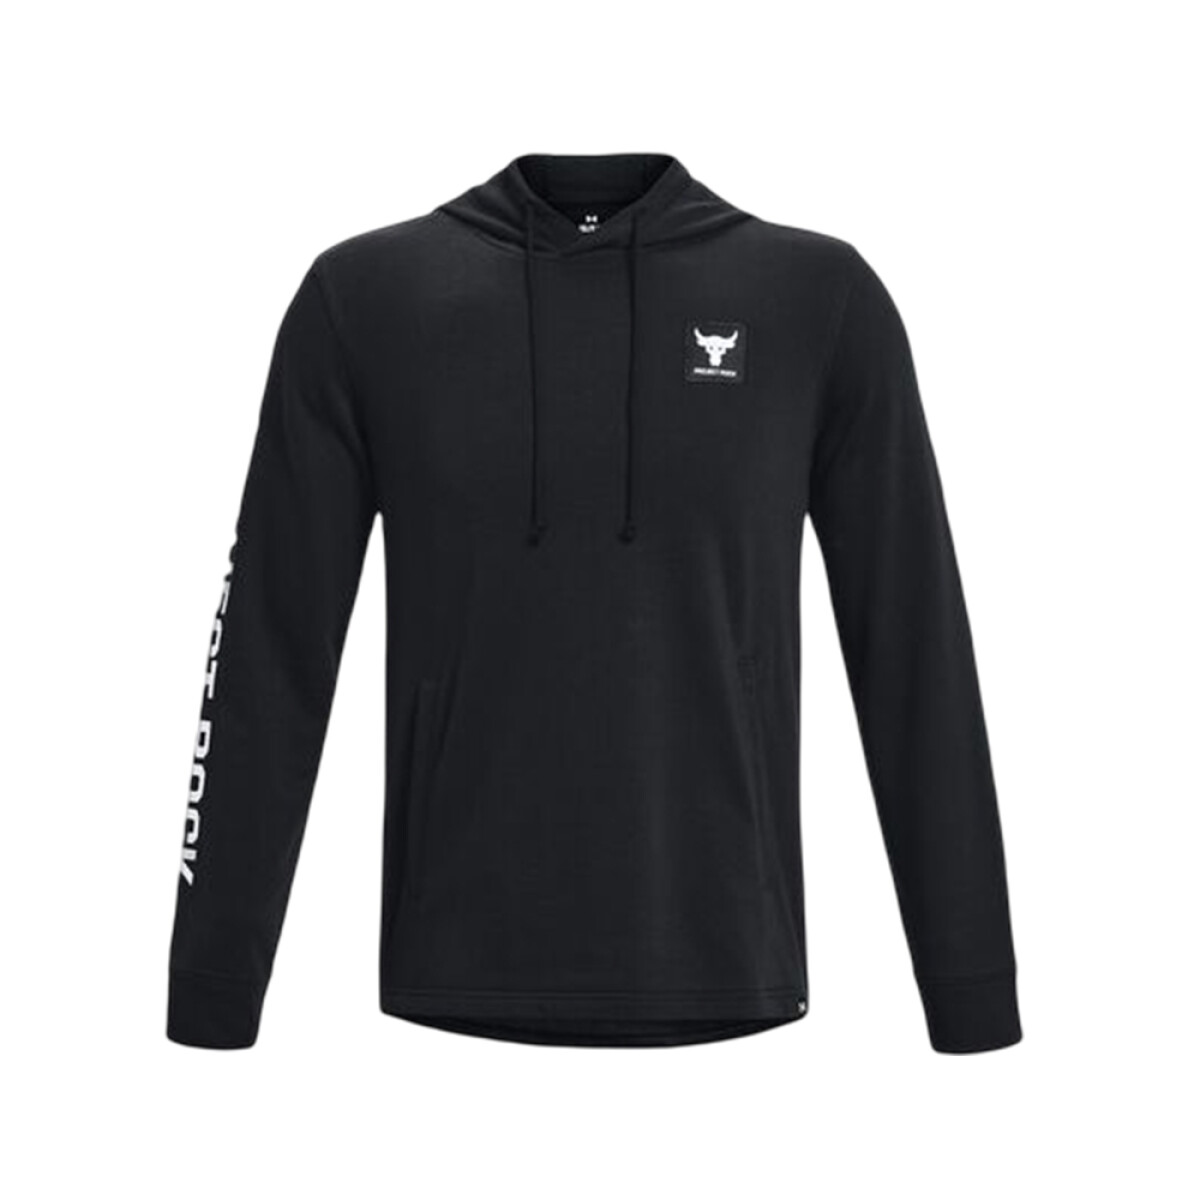 BUZO UNDER ARMOUR PROJECT ROCK TERRY - Black 